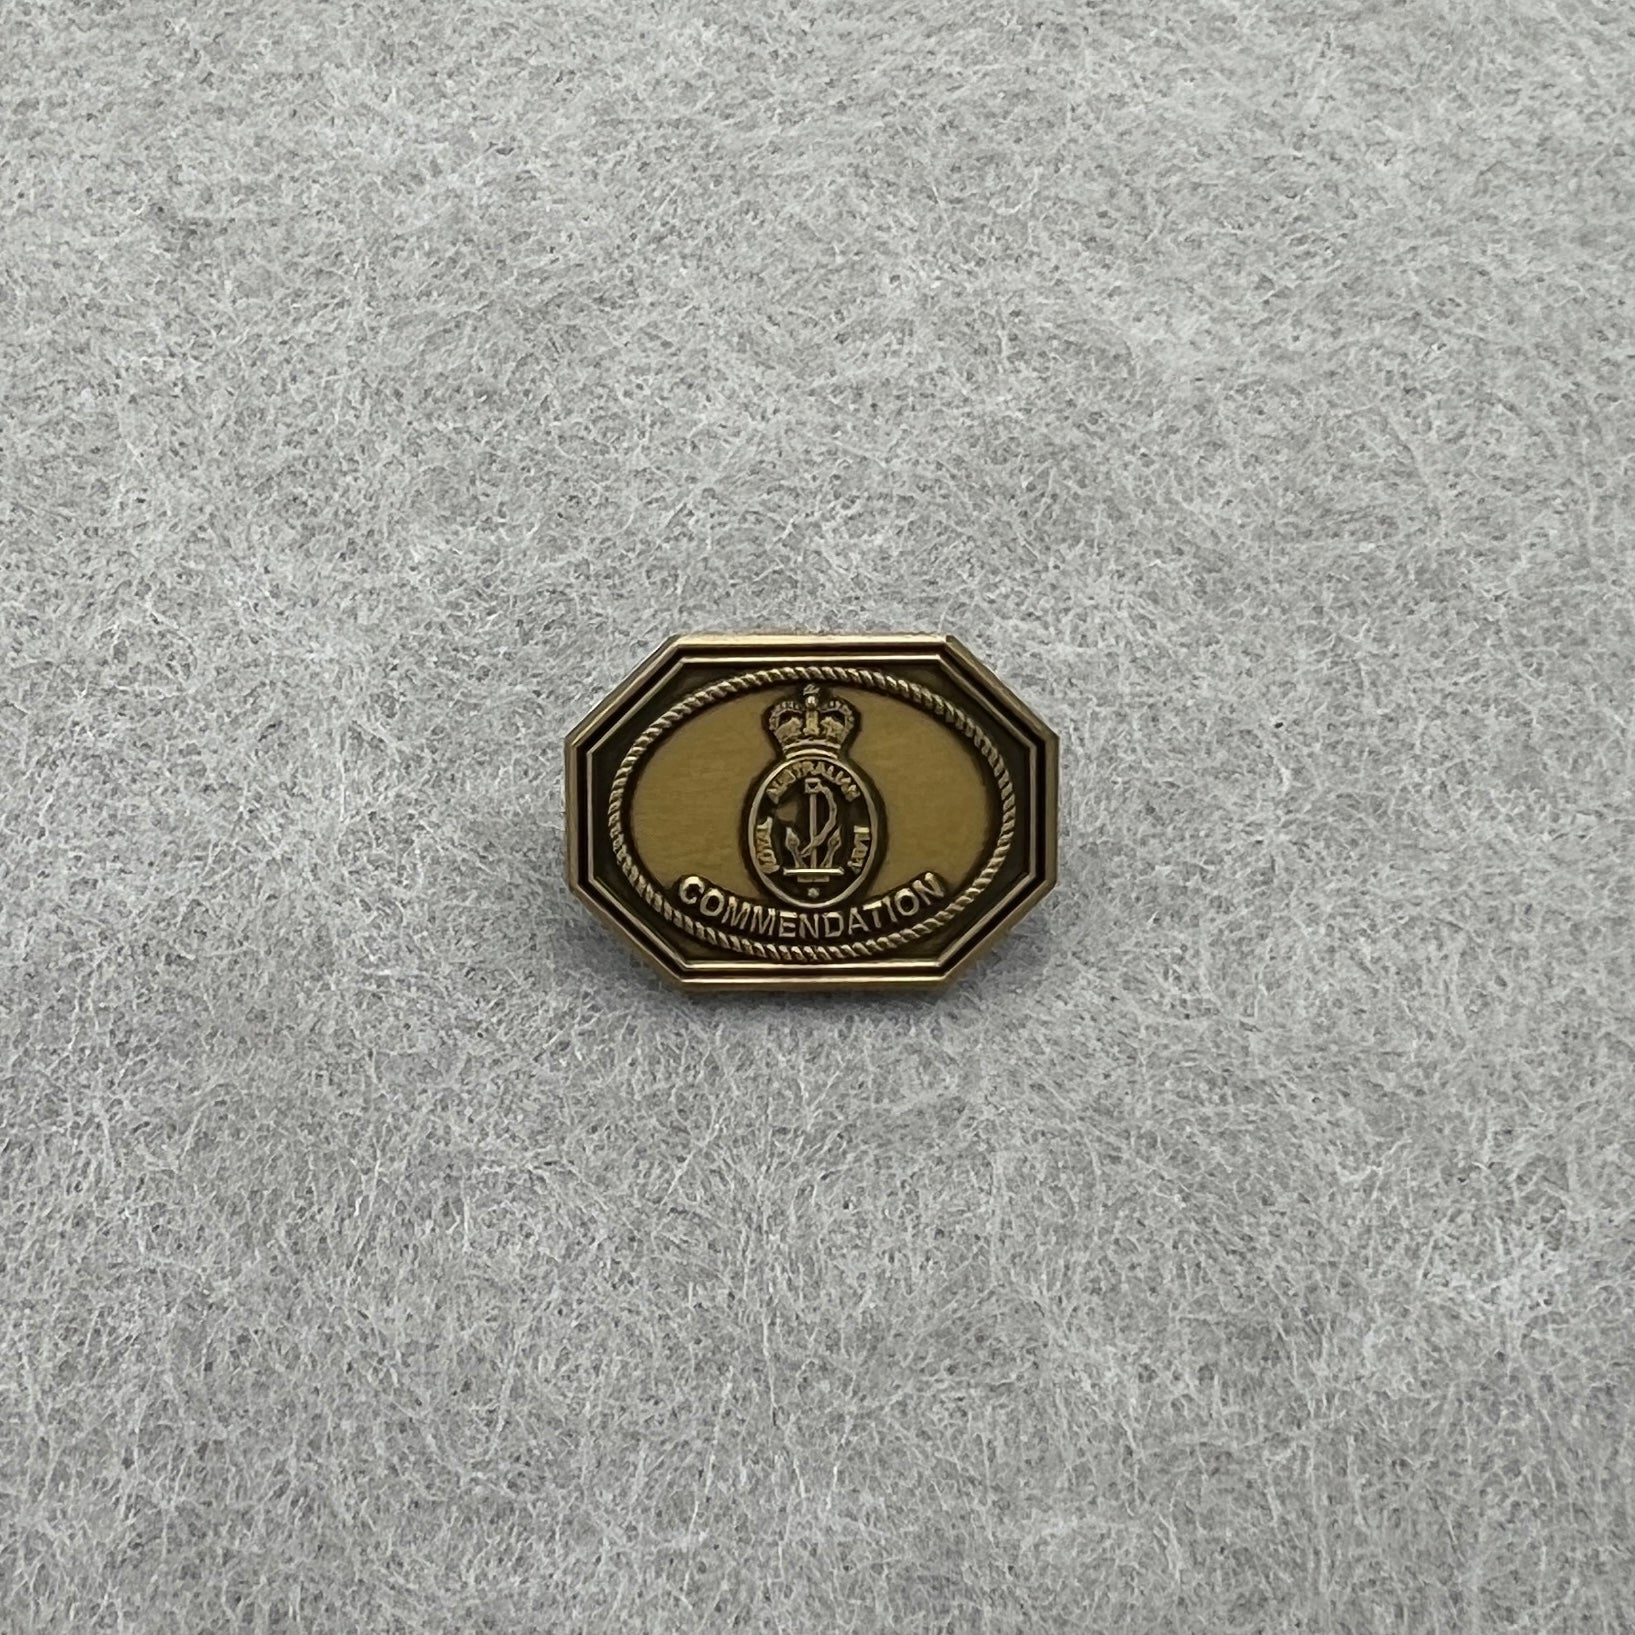 Royal Australian Navy (Level 3 - Gold) Commendation Badge - Foxhole Medals